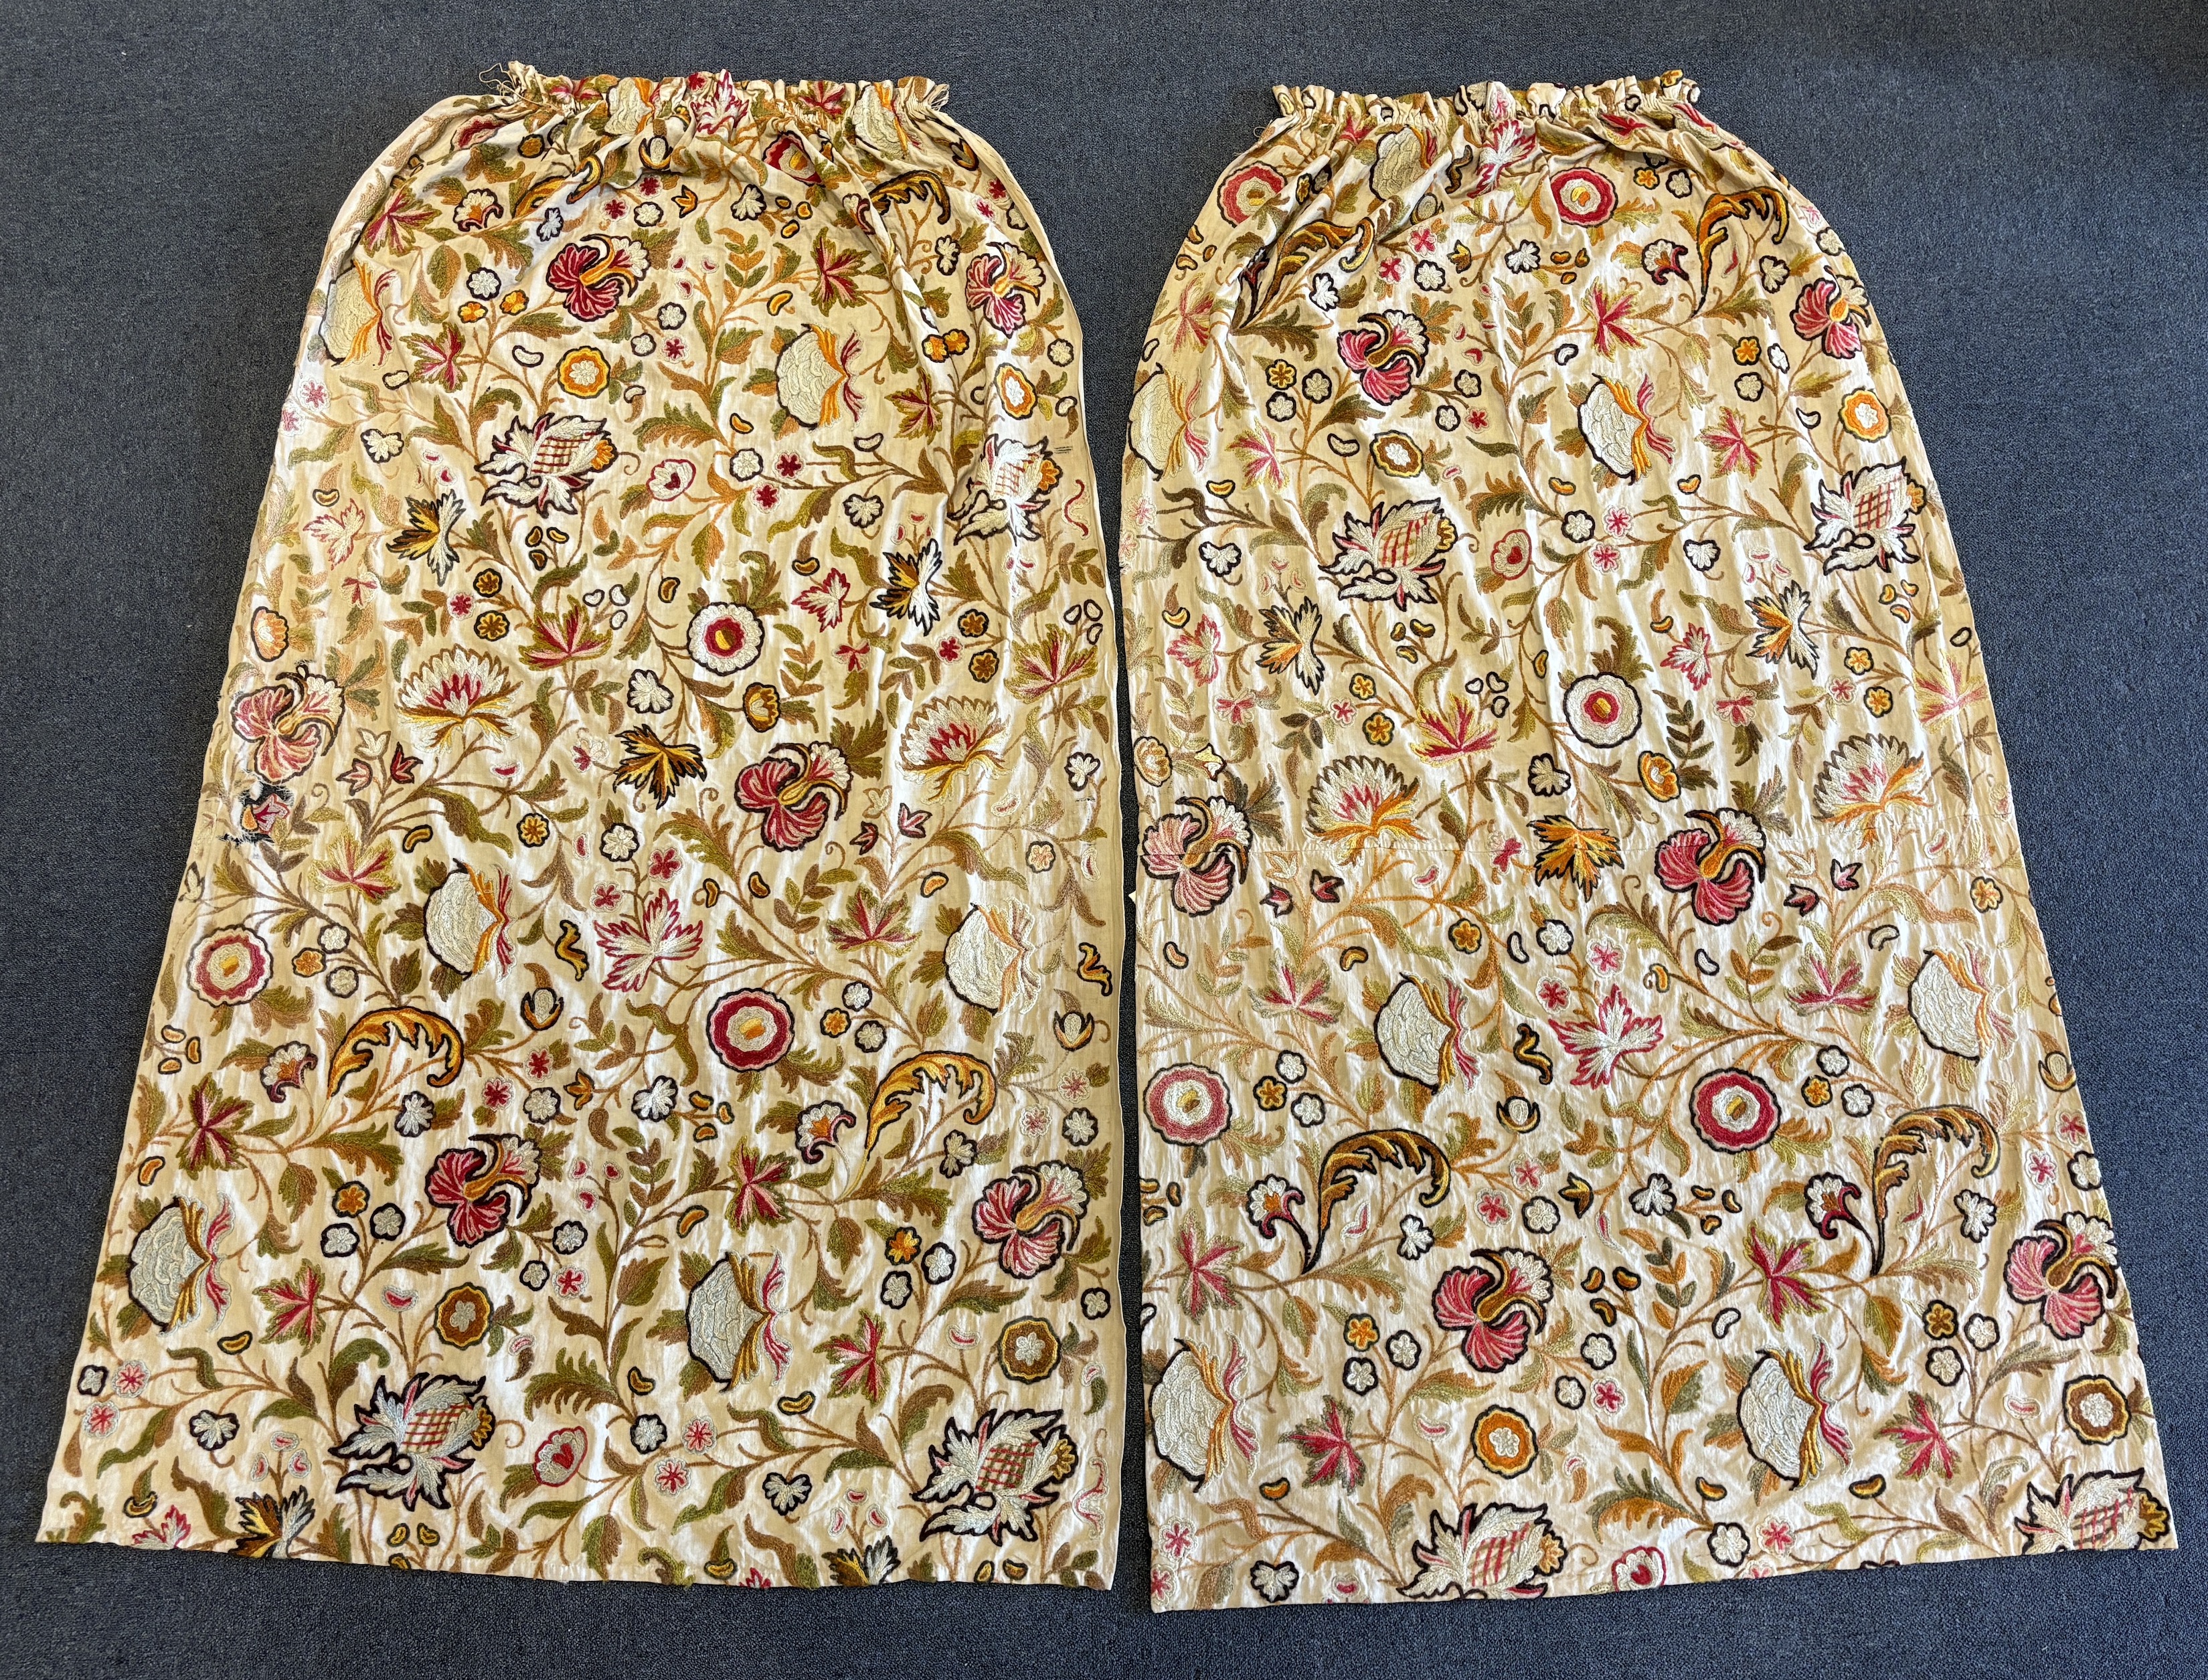 Two mid 20th century cream linen and ‘crewel work’ curtains, embroidered with chain stitch in multicoloured wools, both are unlined, one 229cm long x 116cm wide, the other 213cm long x 125cm wide